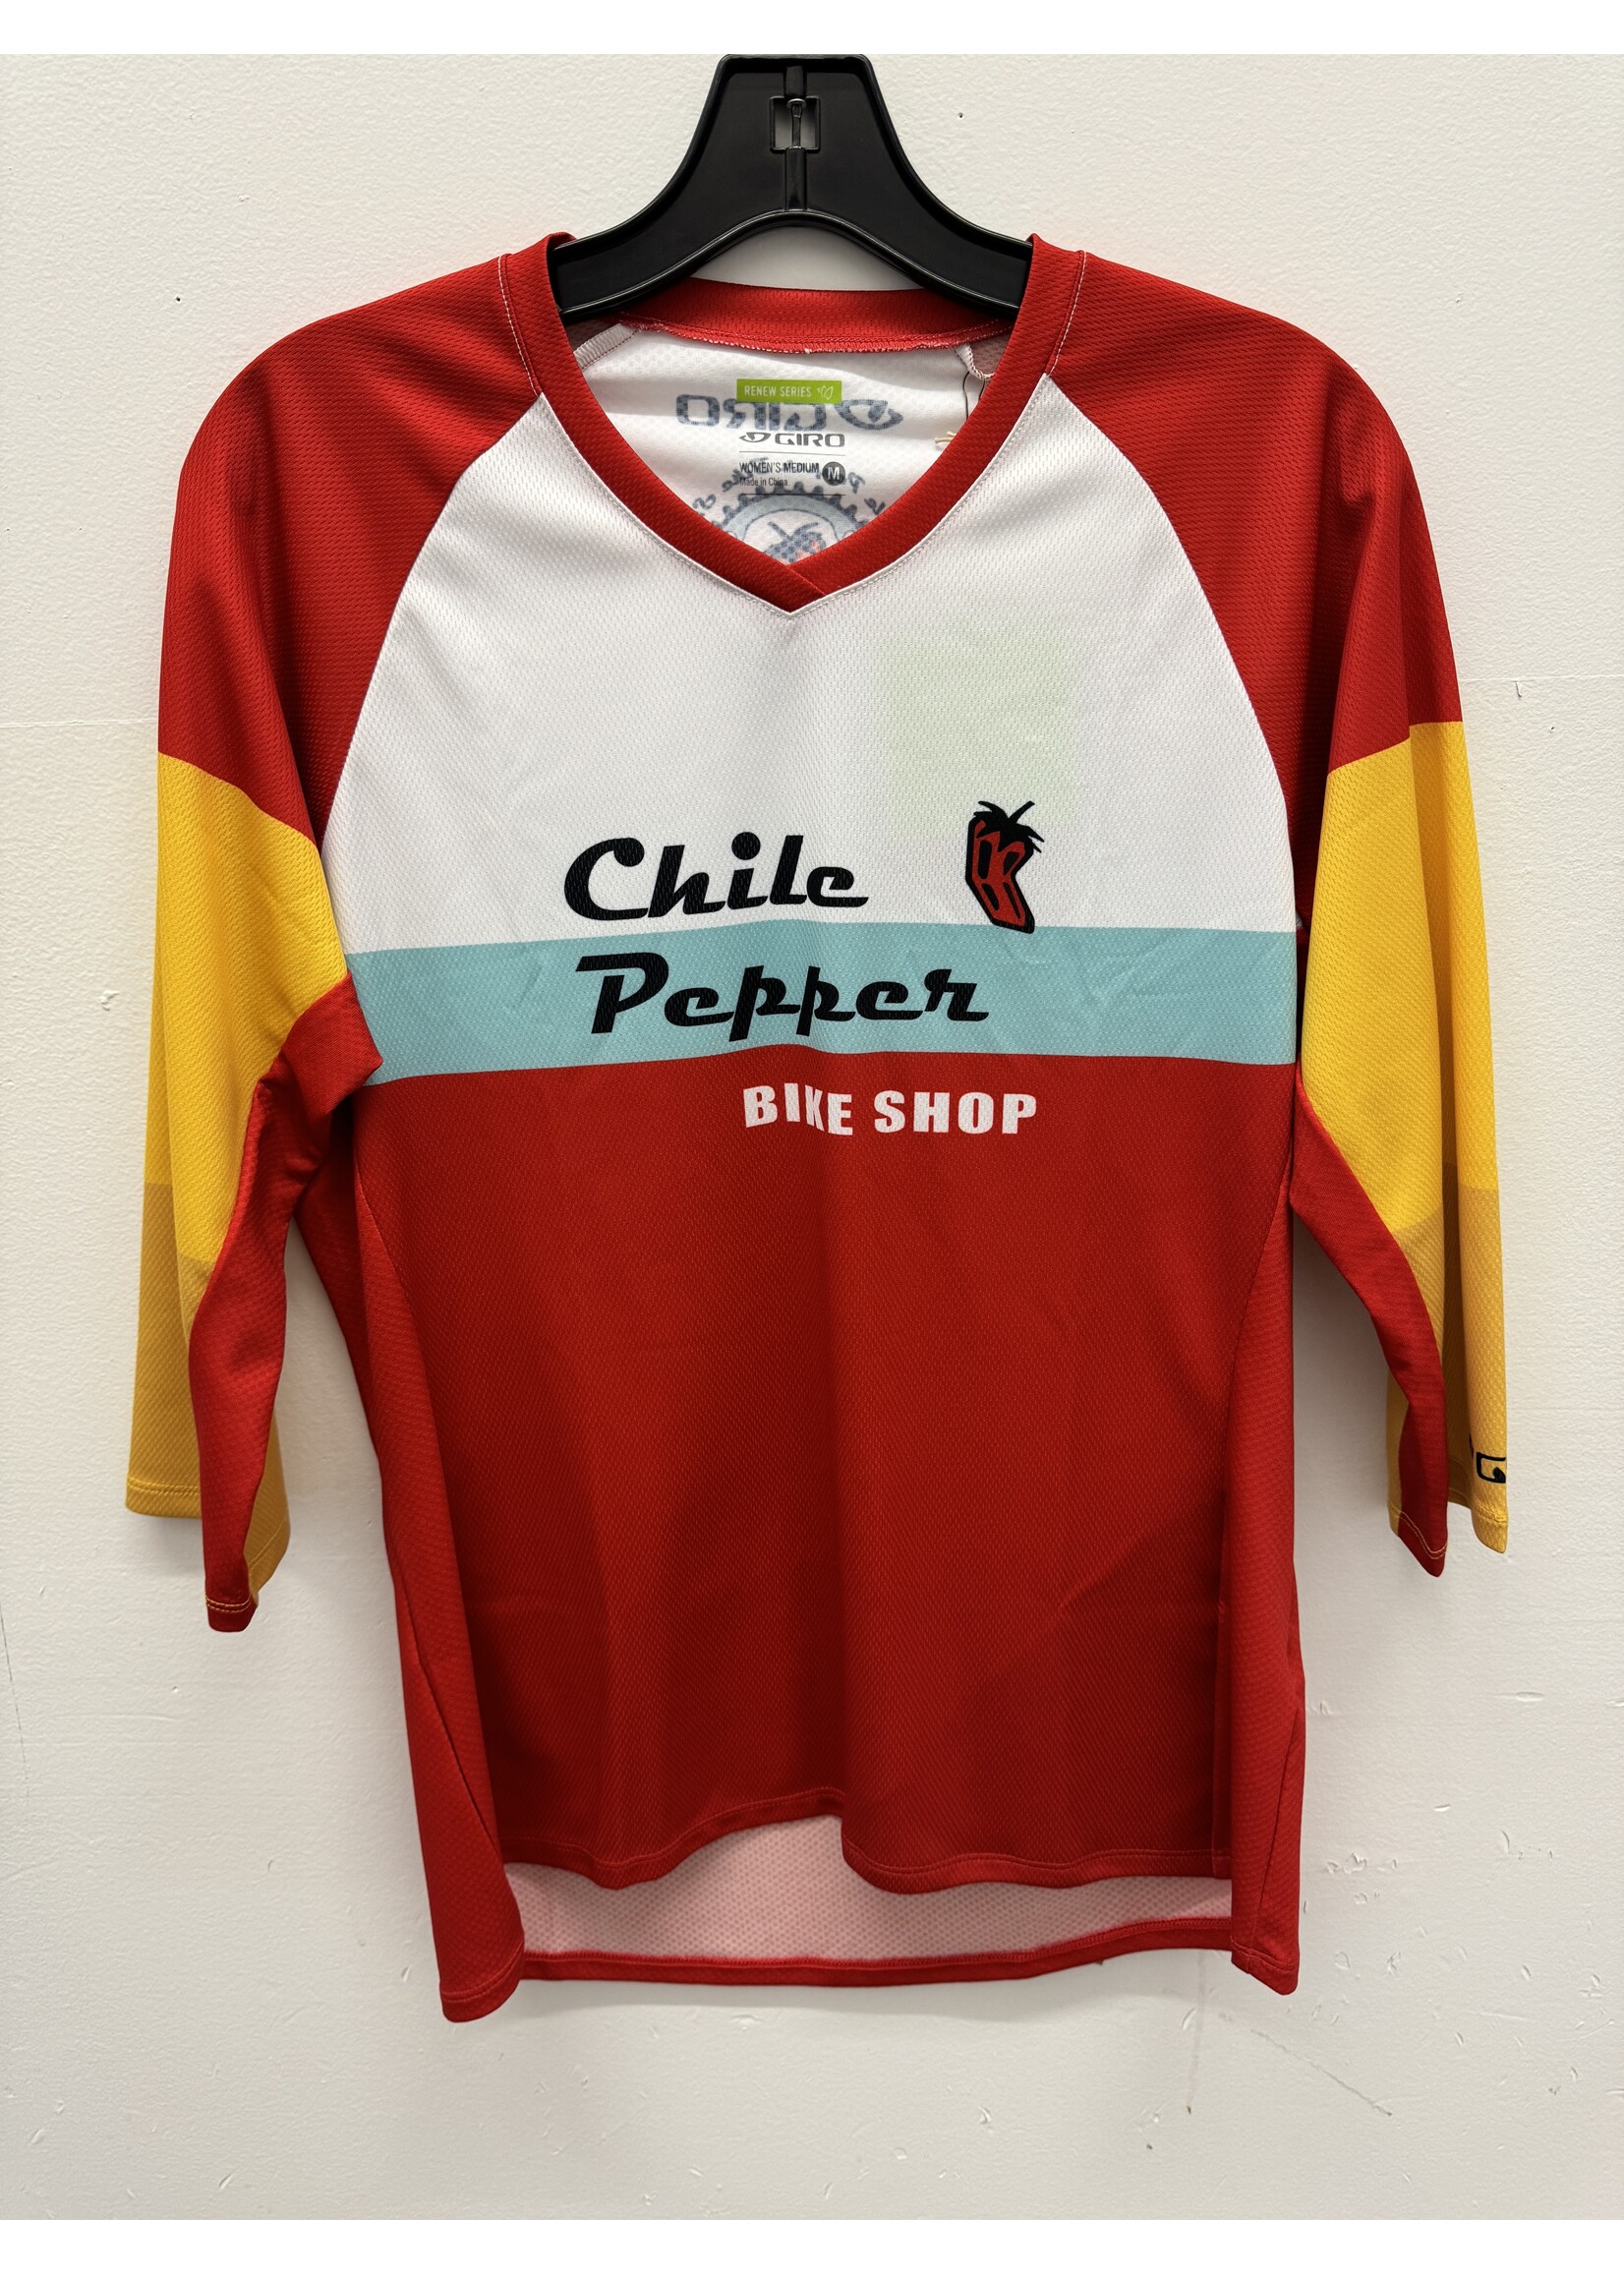 BRG Chile Pepper Custom S22 - W Roust 3/4 Sleeve Jersey RED/YEL M